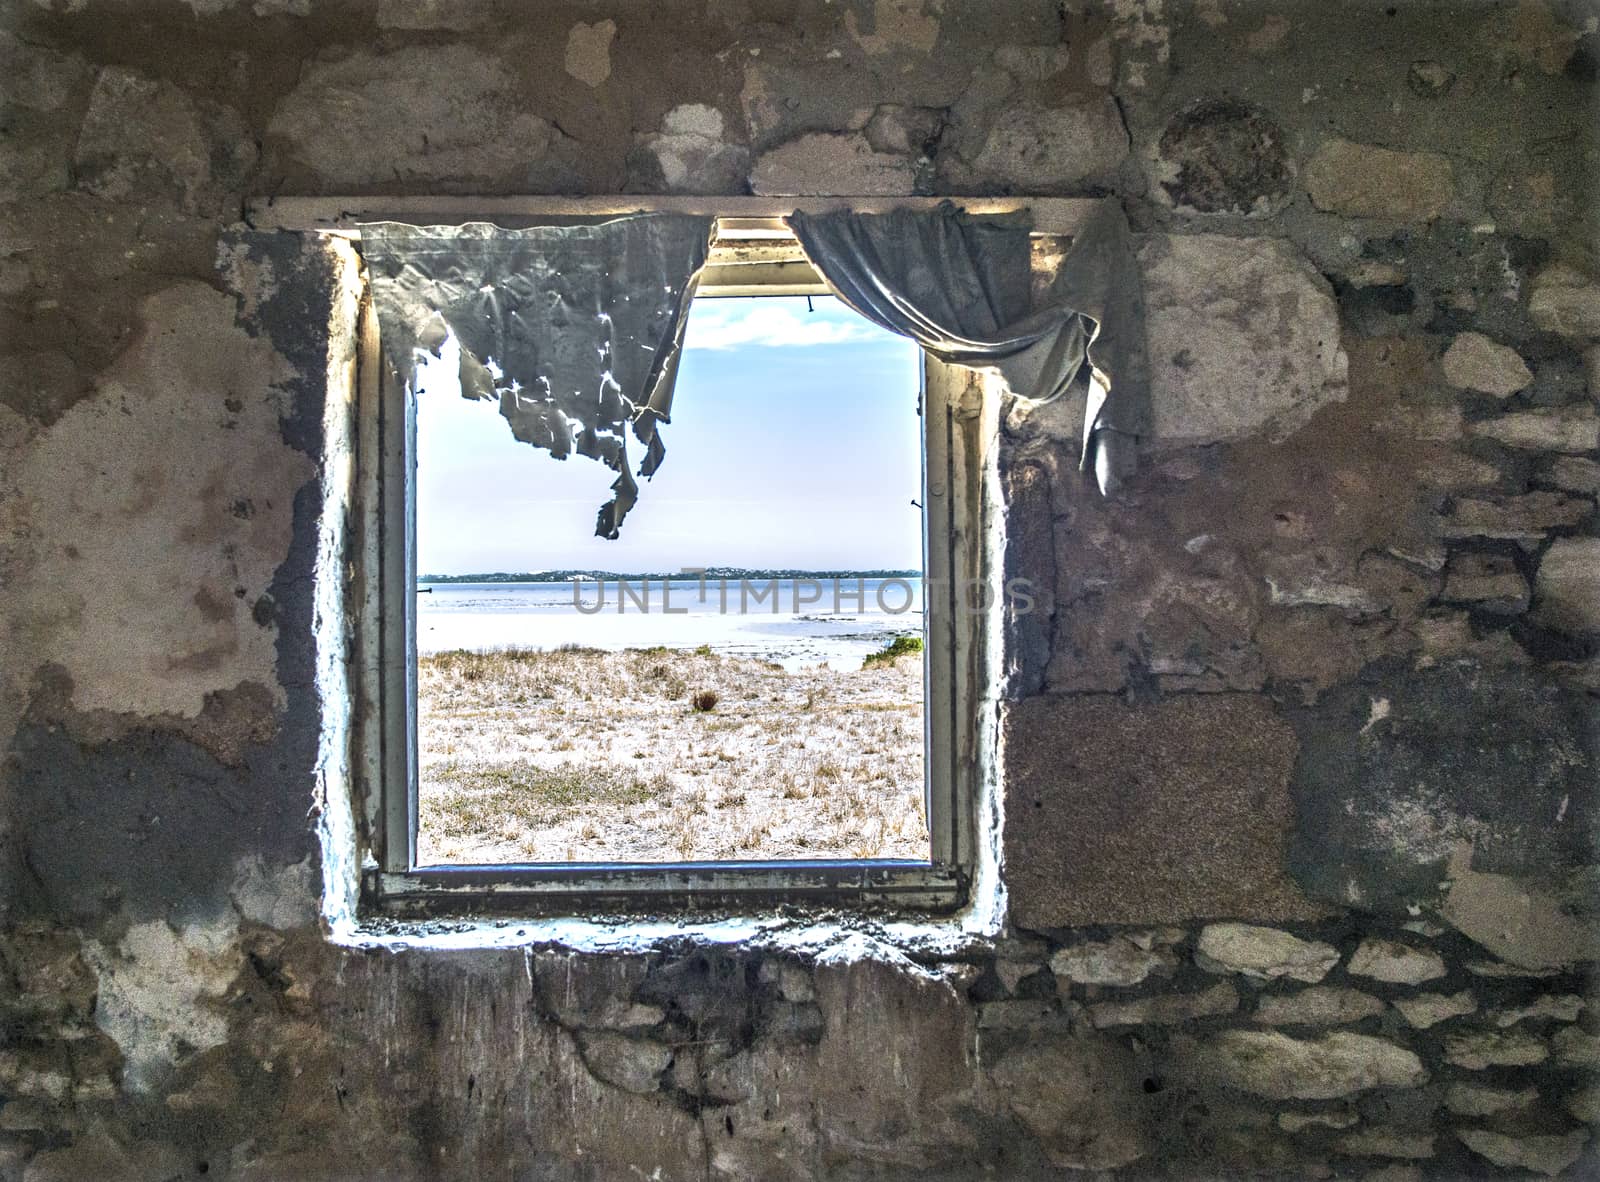 Looking through the window at beautiful coastal views from the ruins of an old stone building